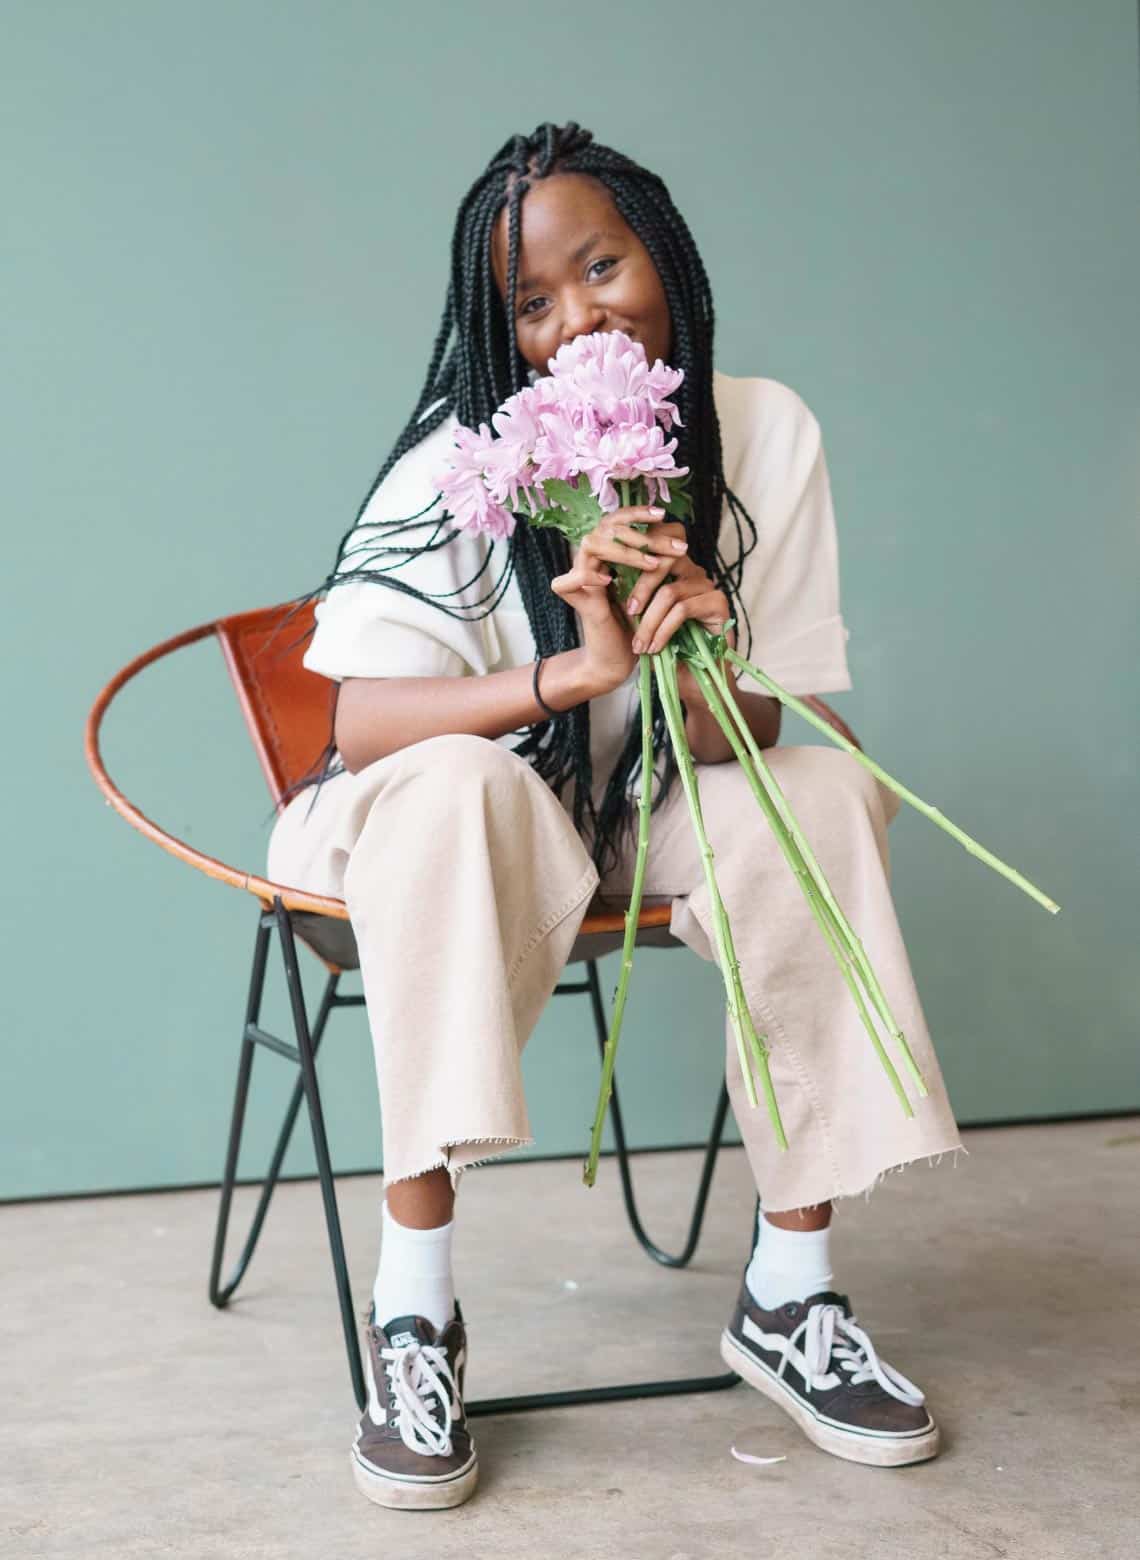 person sitting in a chair holding pink flowers with long stems, wearing baggy khaki shirt and pants, with long knotless braids